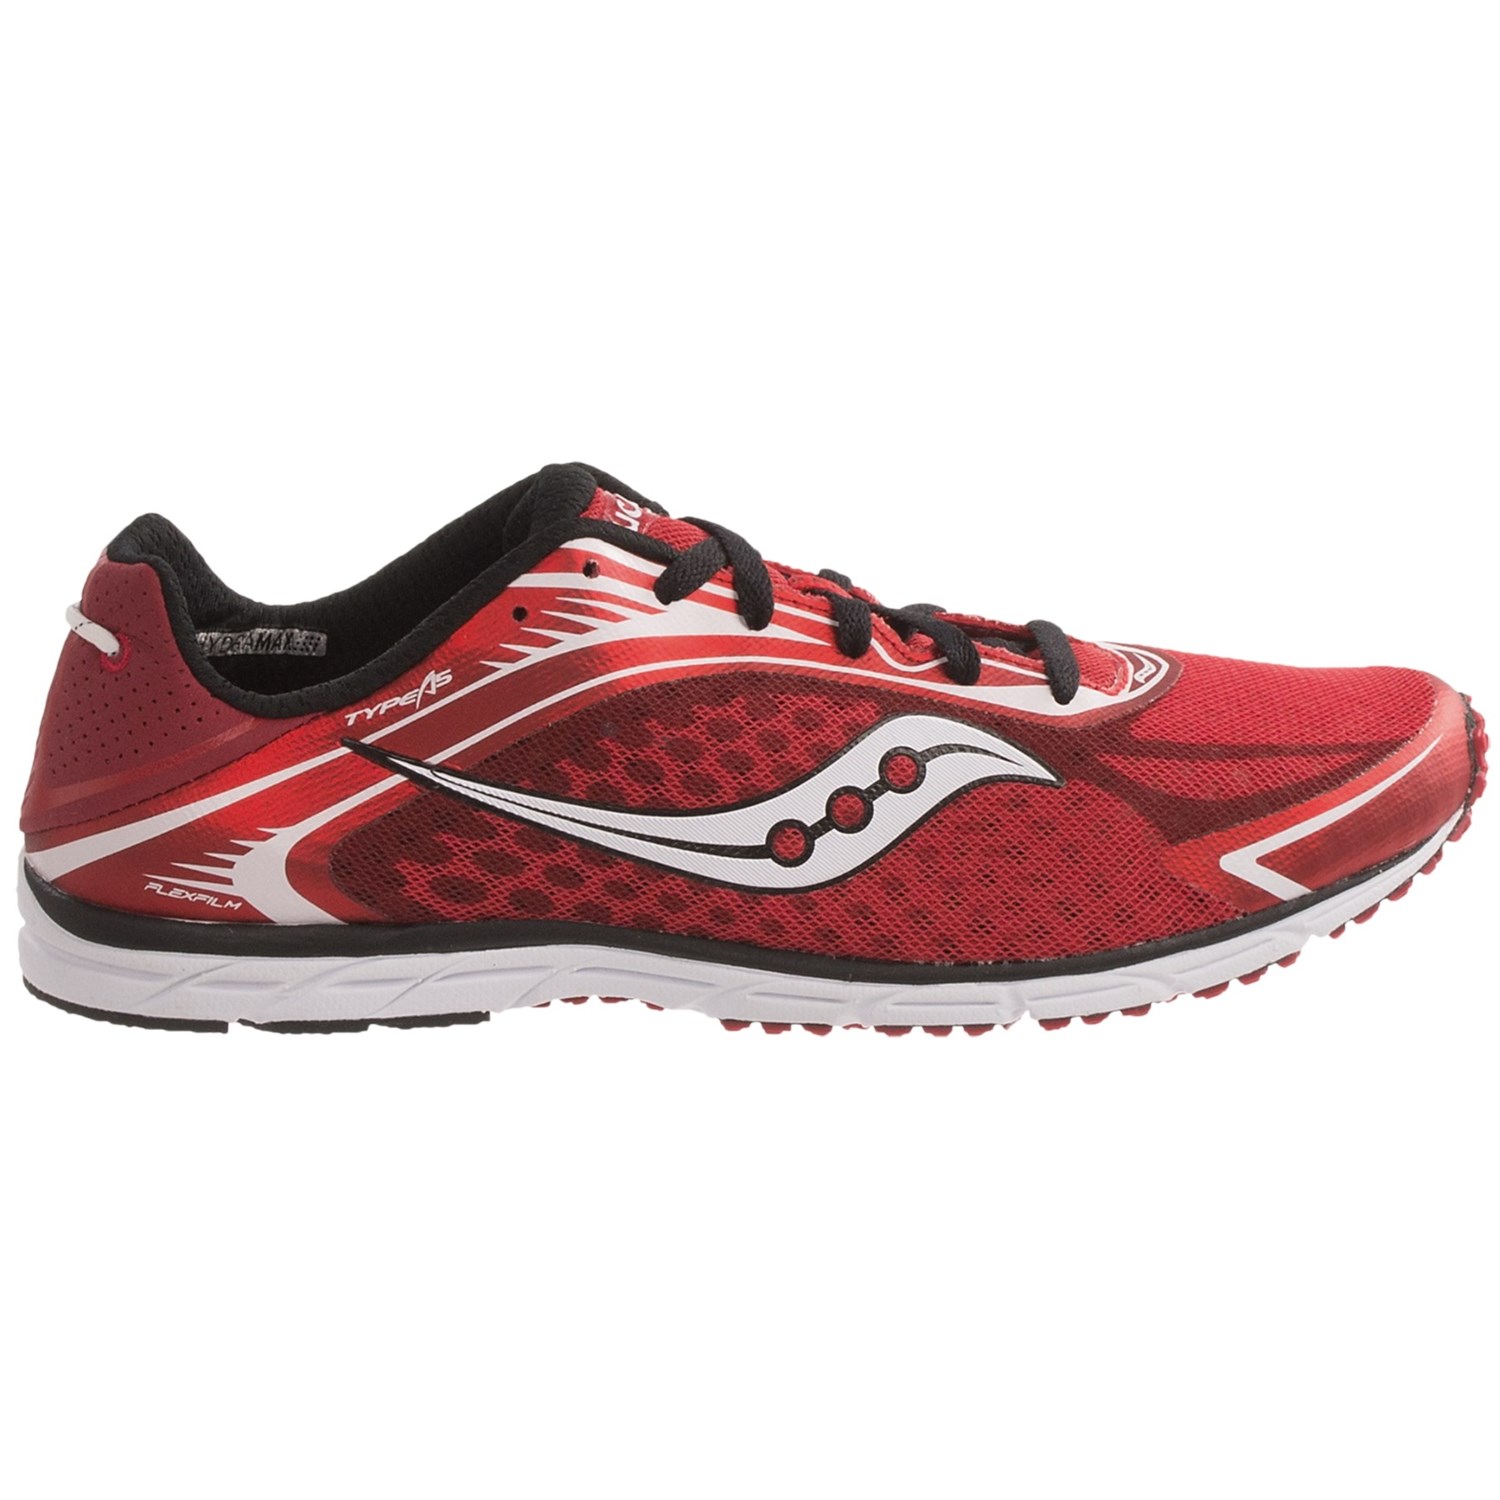 saucony minimalist running shoes reviews